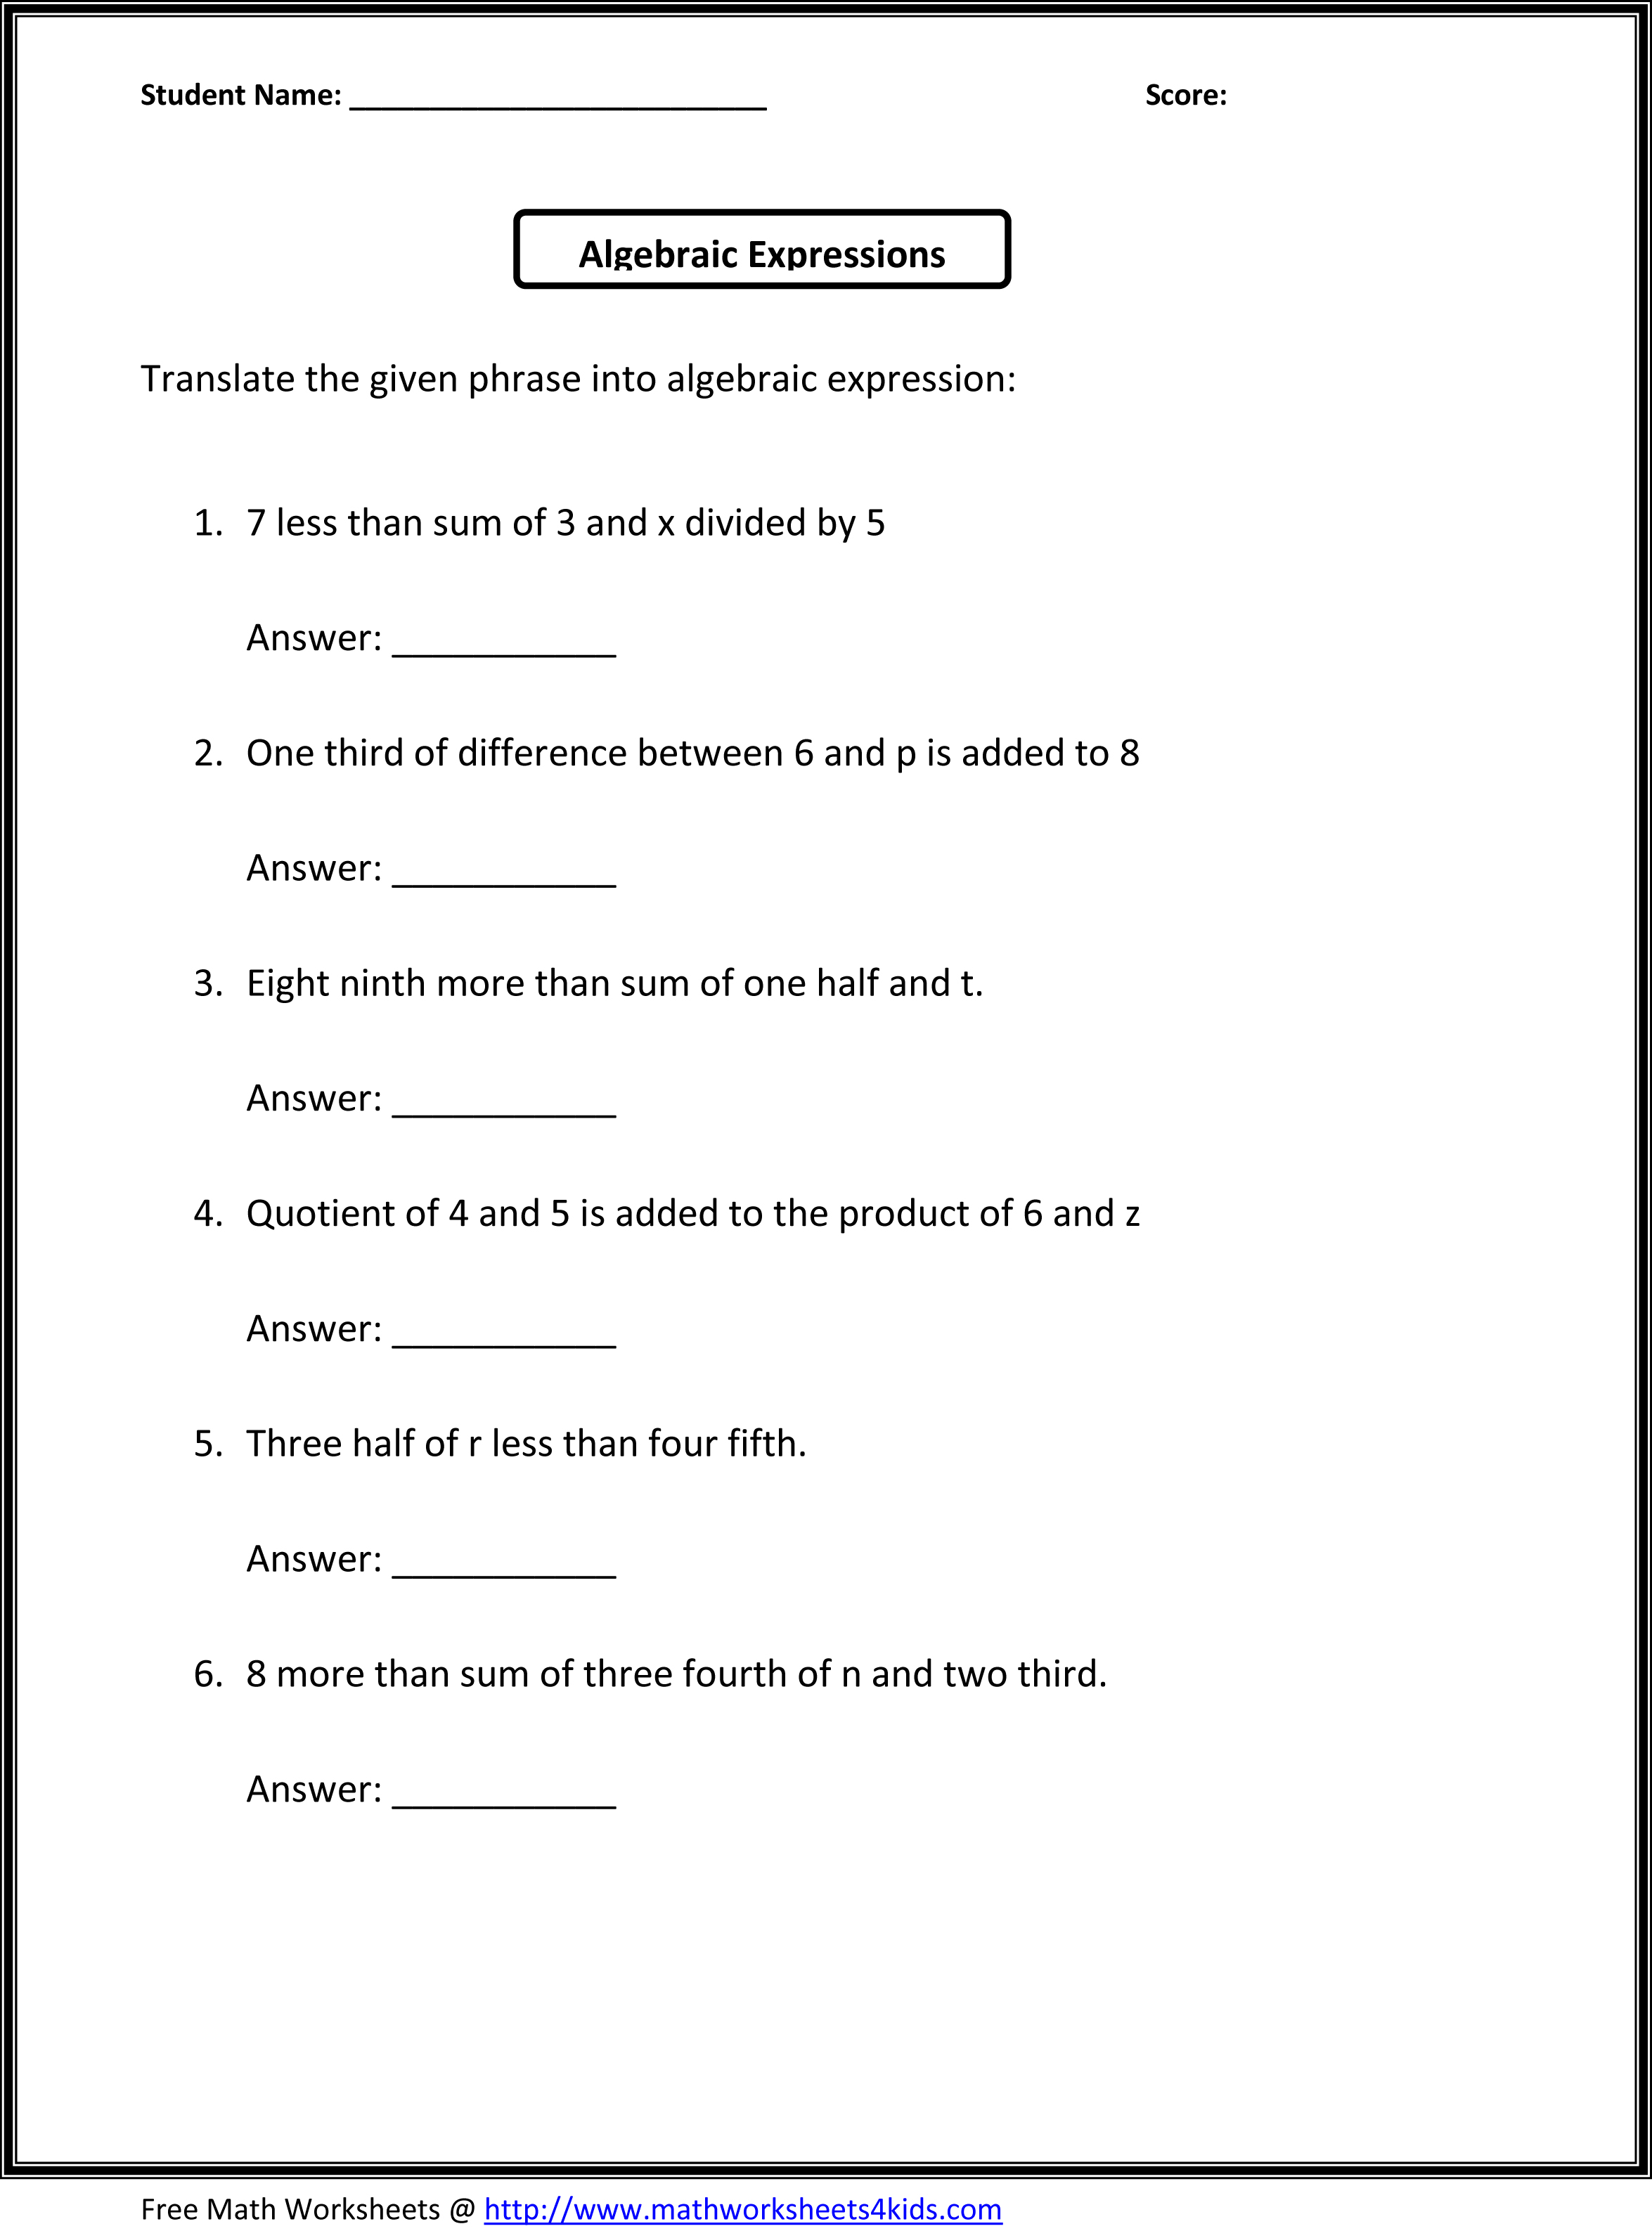 13 Best Images Of 6th Grade Math Equations Worksheets 7th Grade Math Algebra Equations